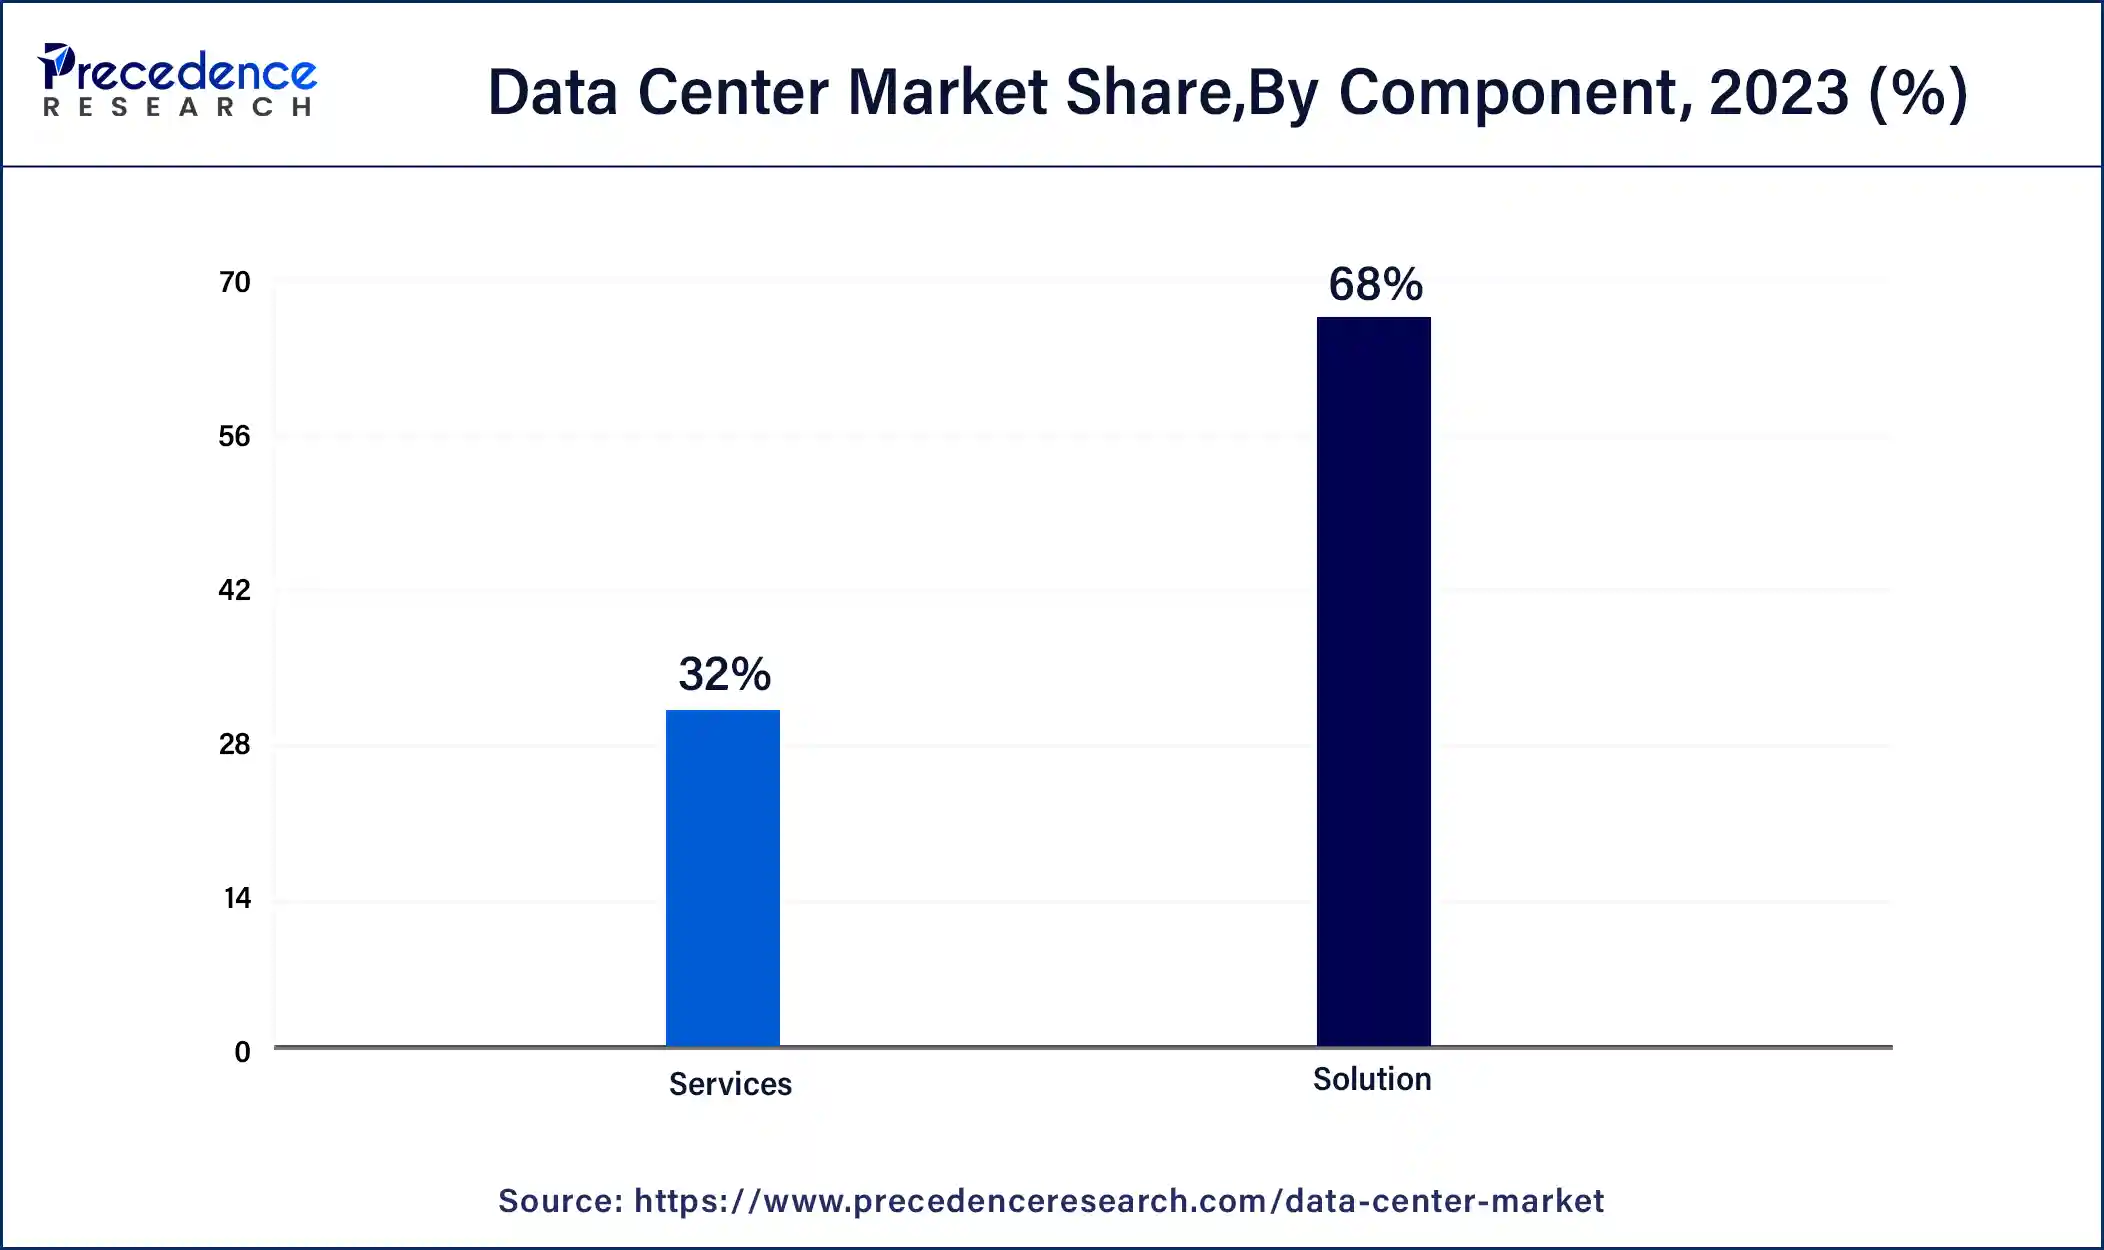 Data Center Market Share, By Component, 2023 (%)